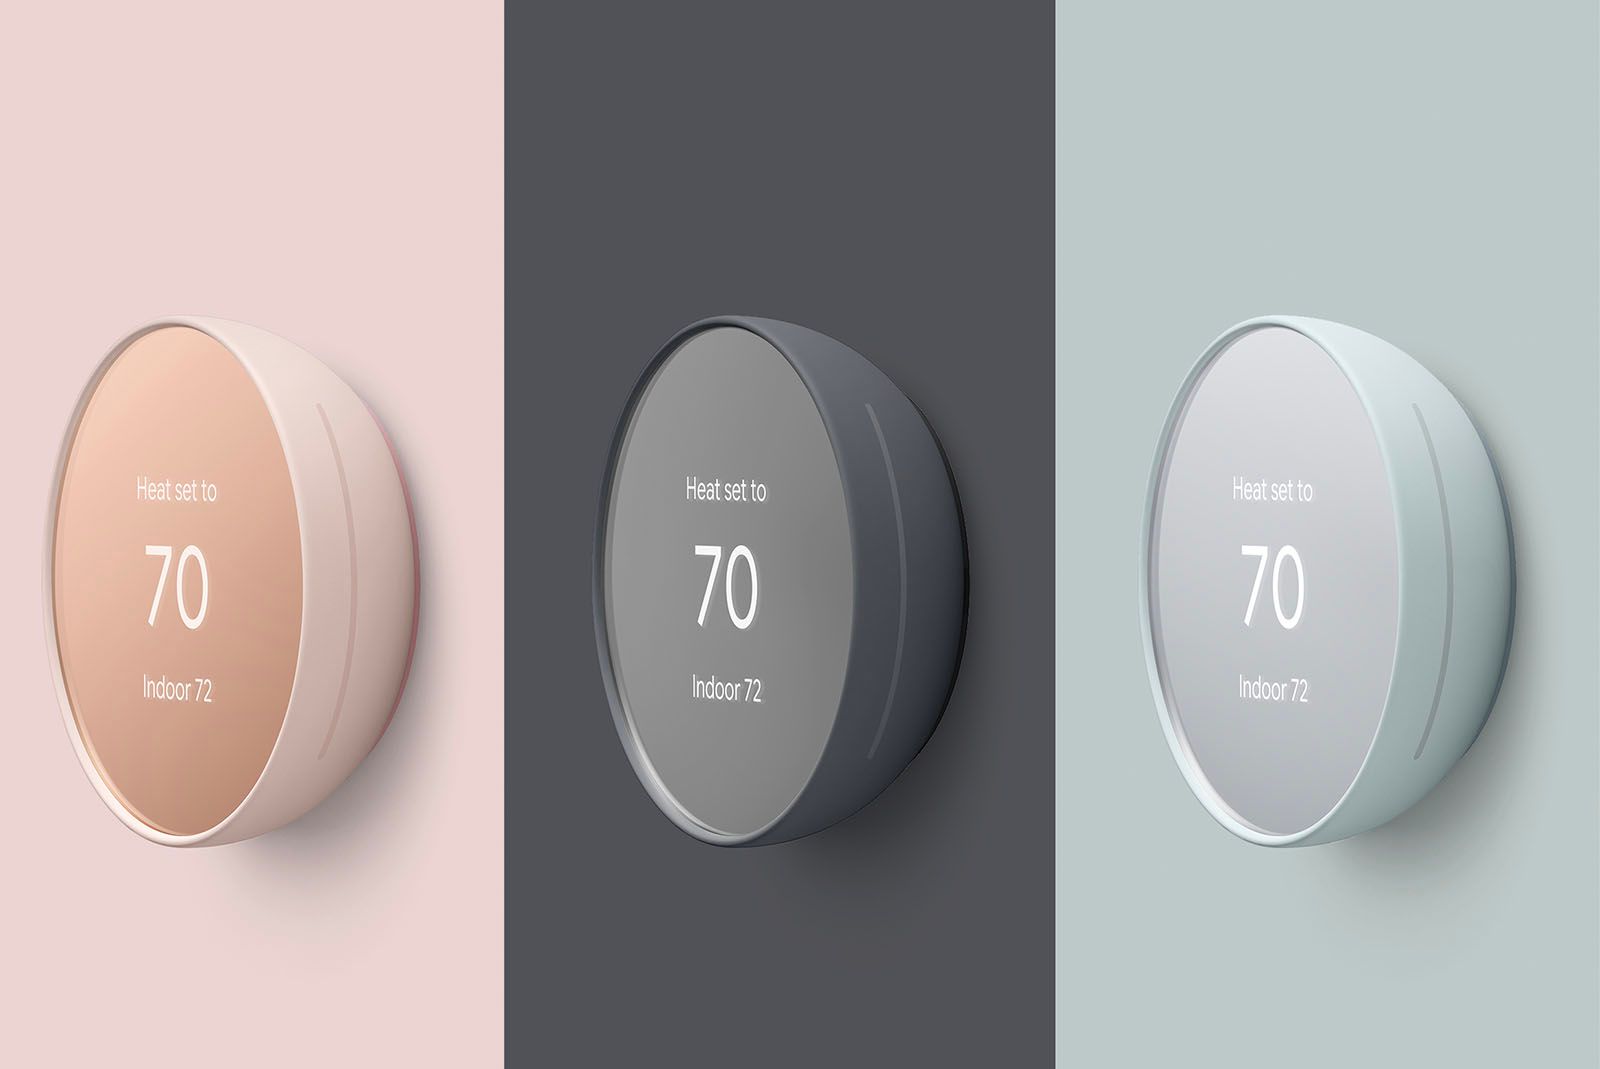 Nest Thermostat vs Amazon Smart Thermostat: Which one should you buy? photo 1